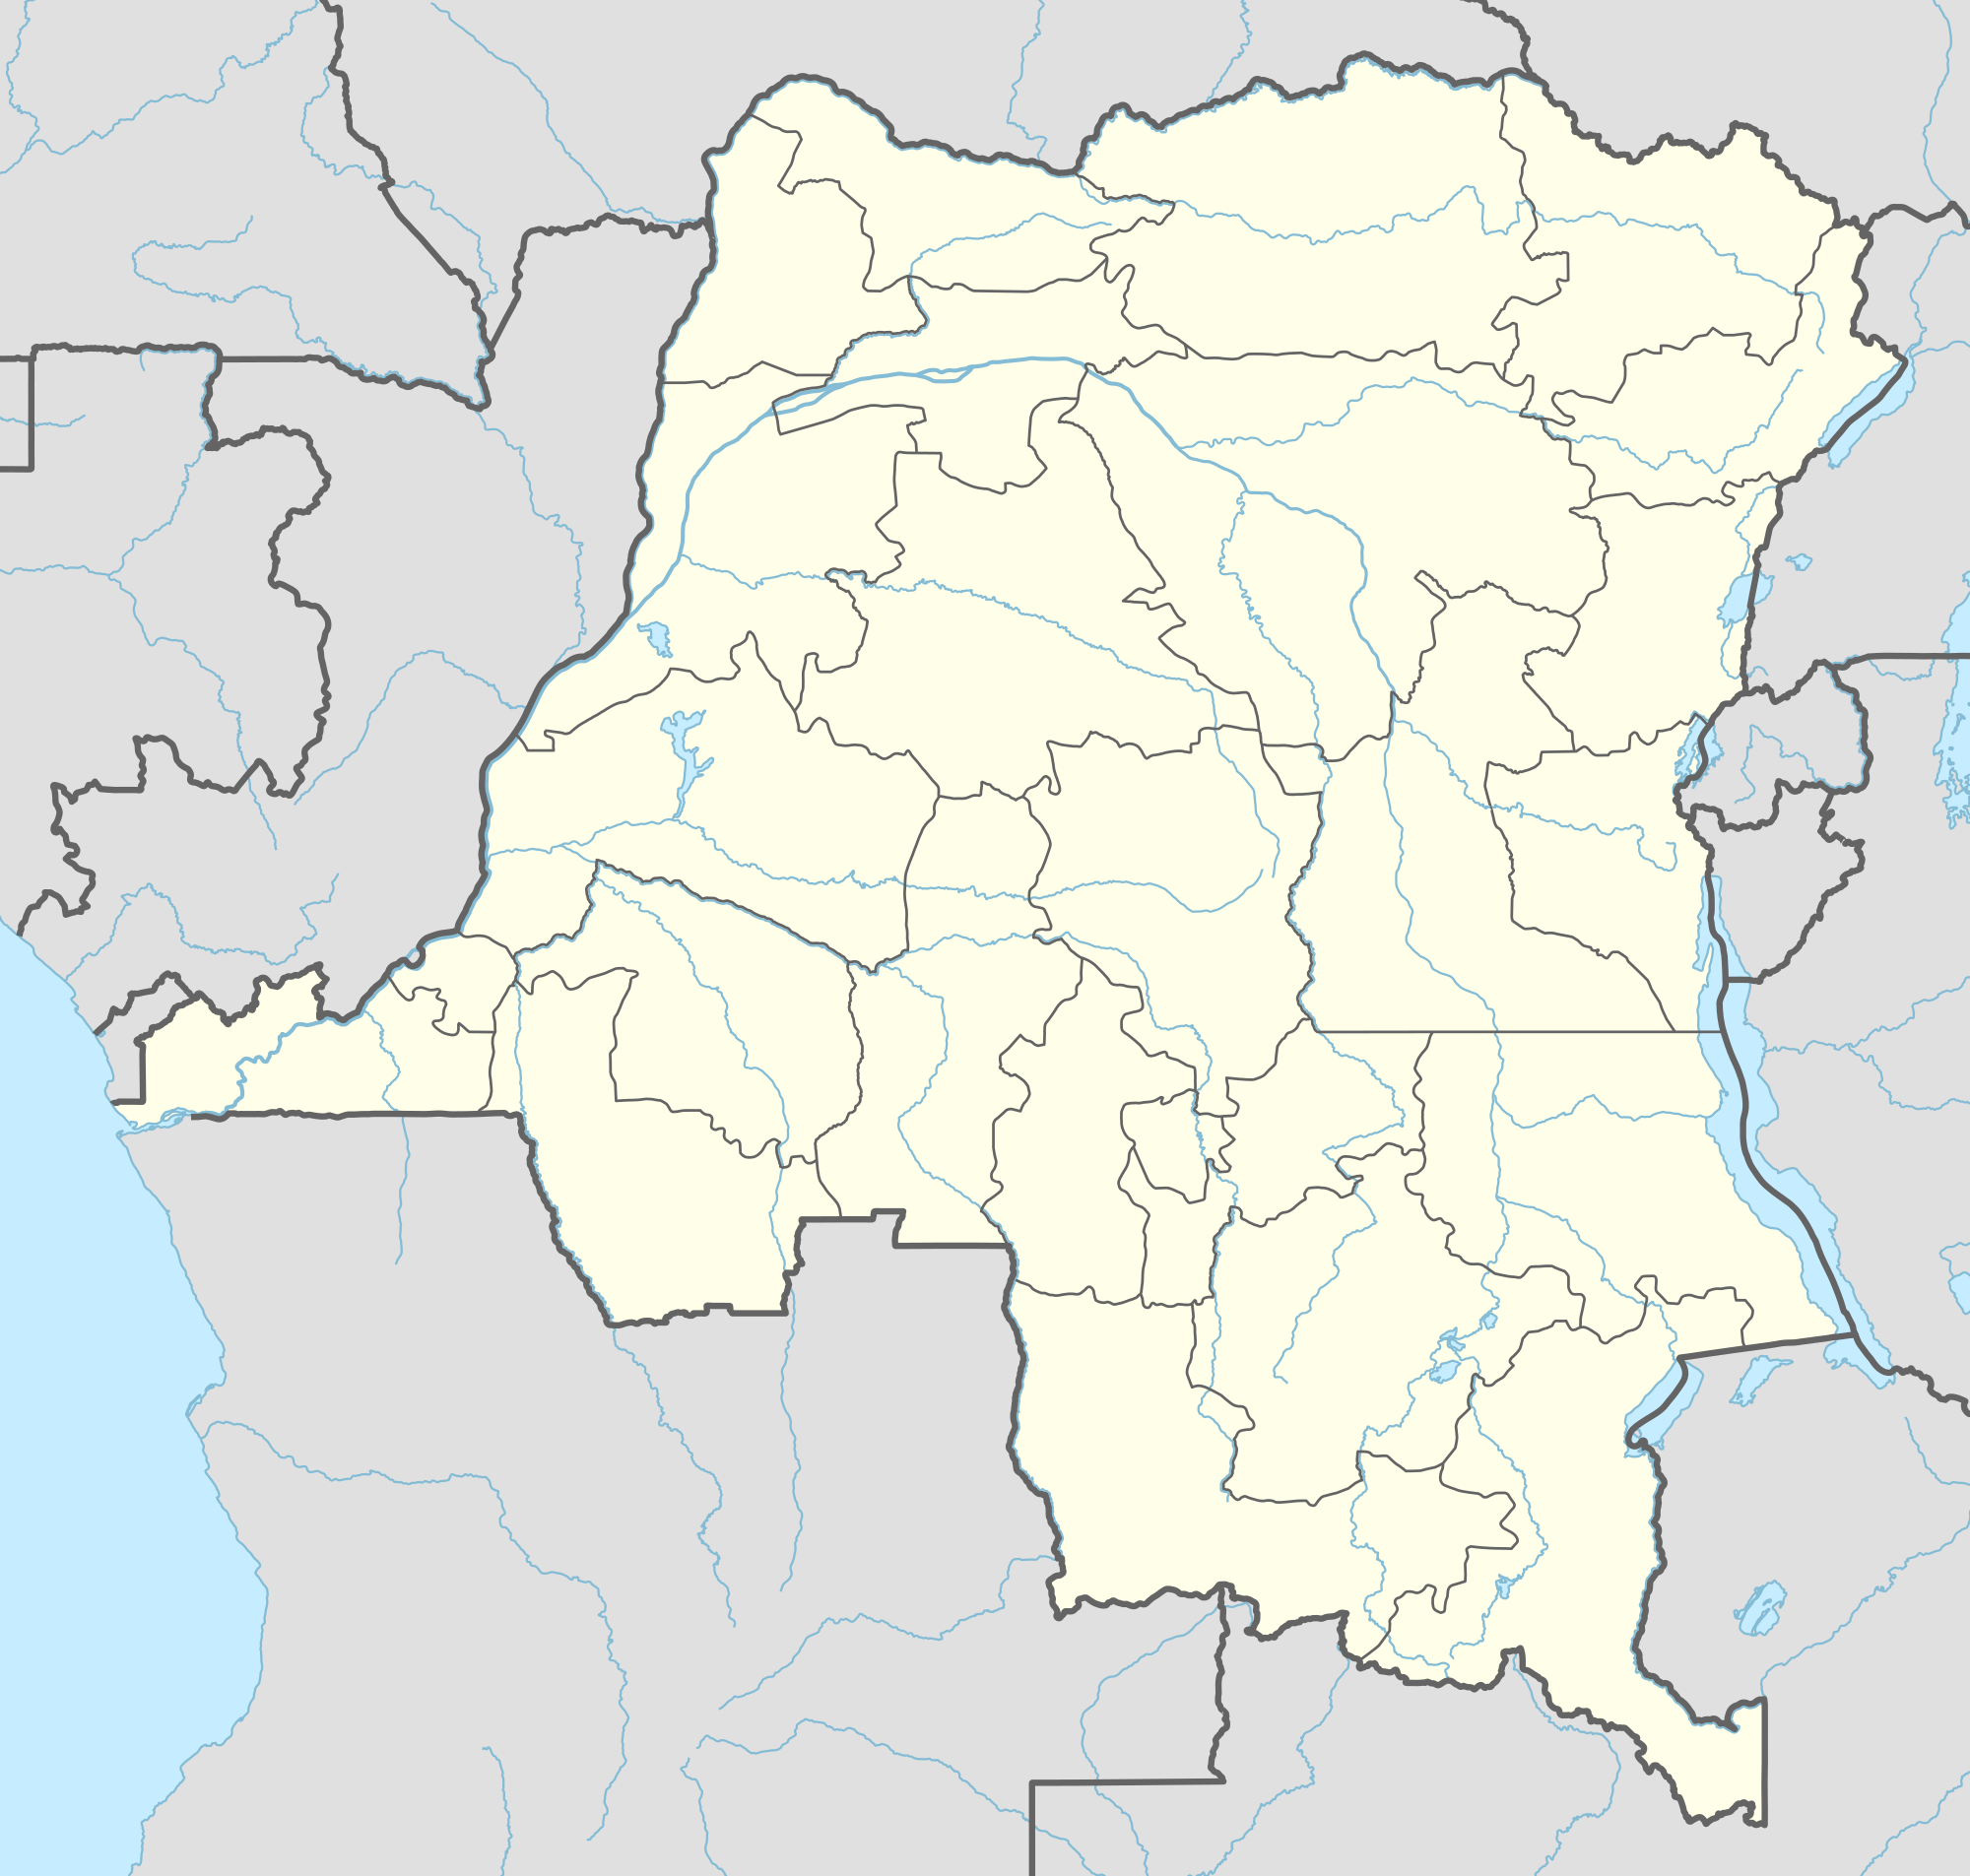 Congo conflict detailed map is located in Democratic Republic of the Congo